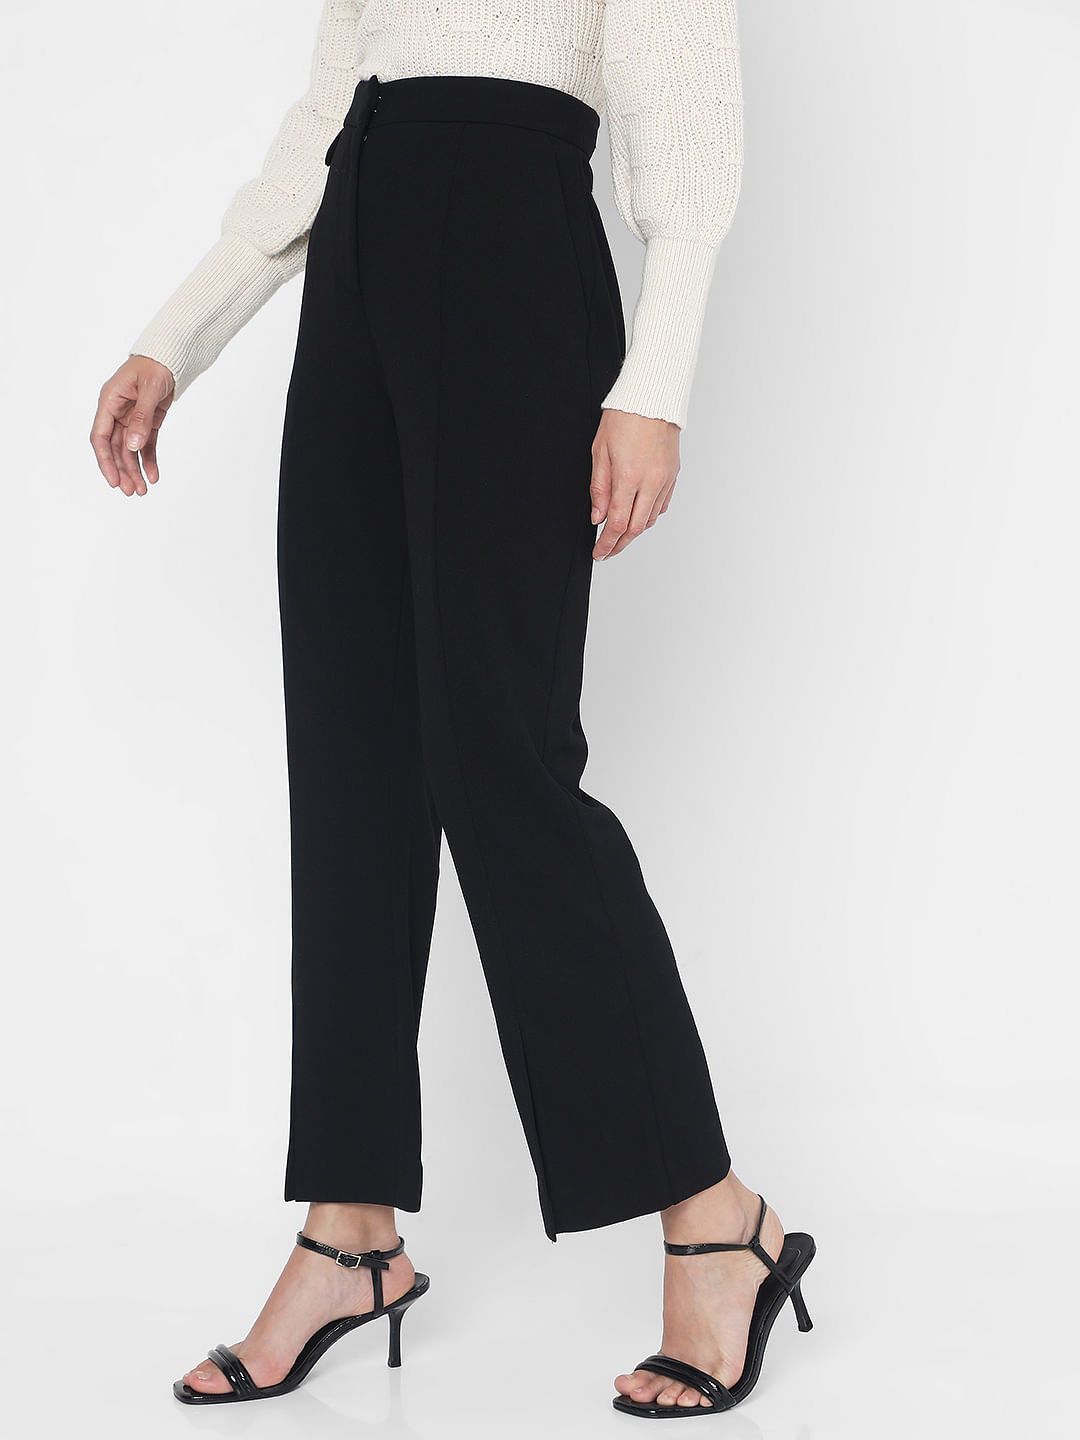 Womens alice + olivia silver Metallic Livi Low-Rise Bootcut Trousers |  Harrods # {CountryCode}